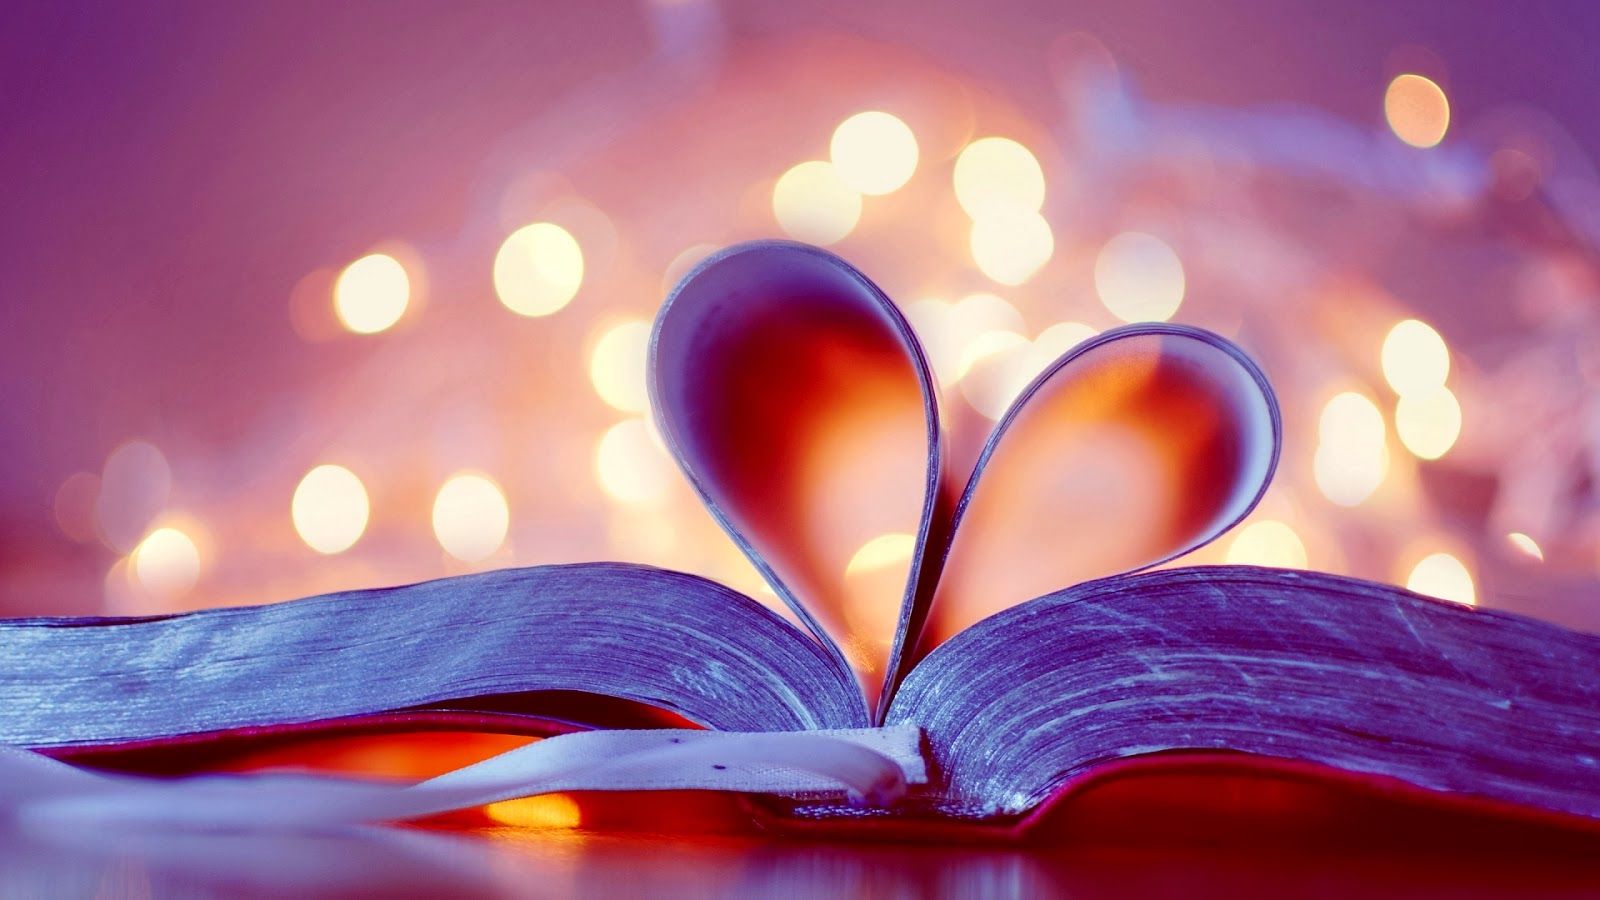 A book with hearts on it sitting in front of lights - Valentine's Day